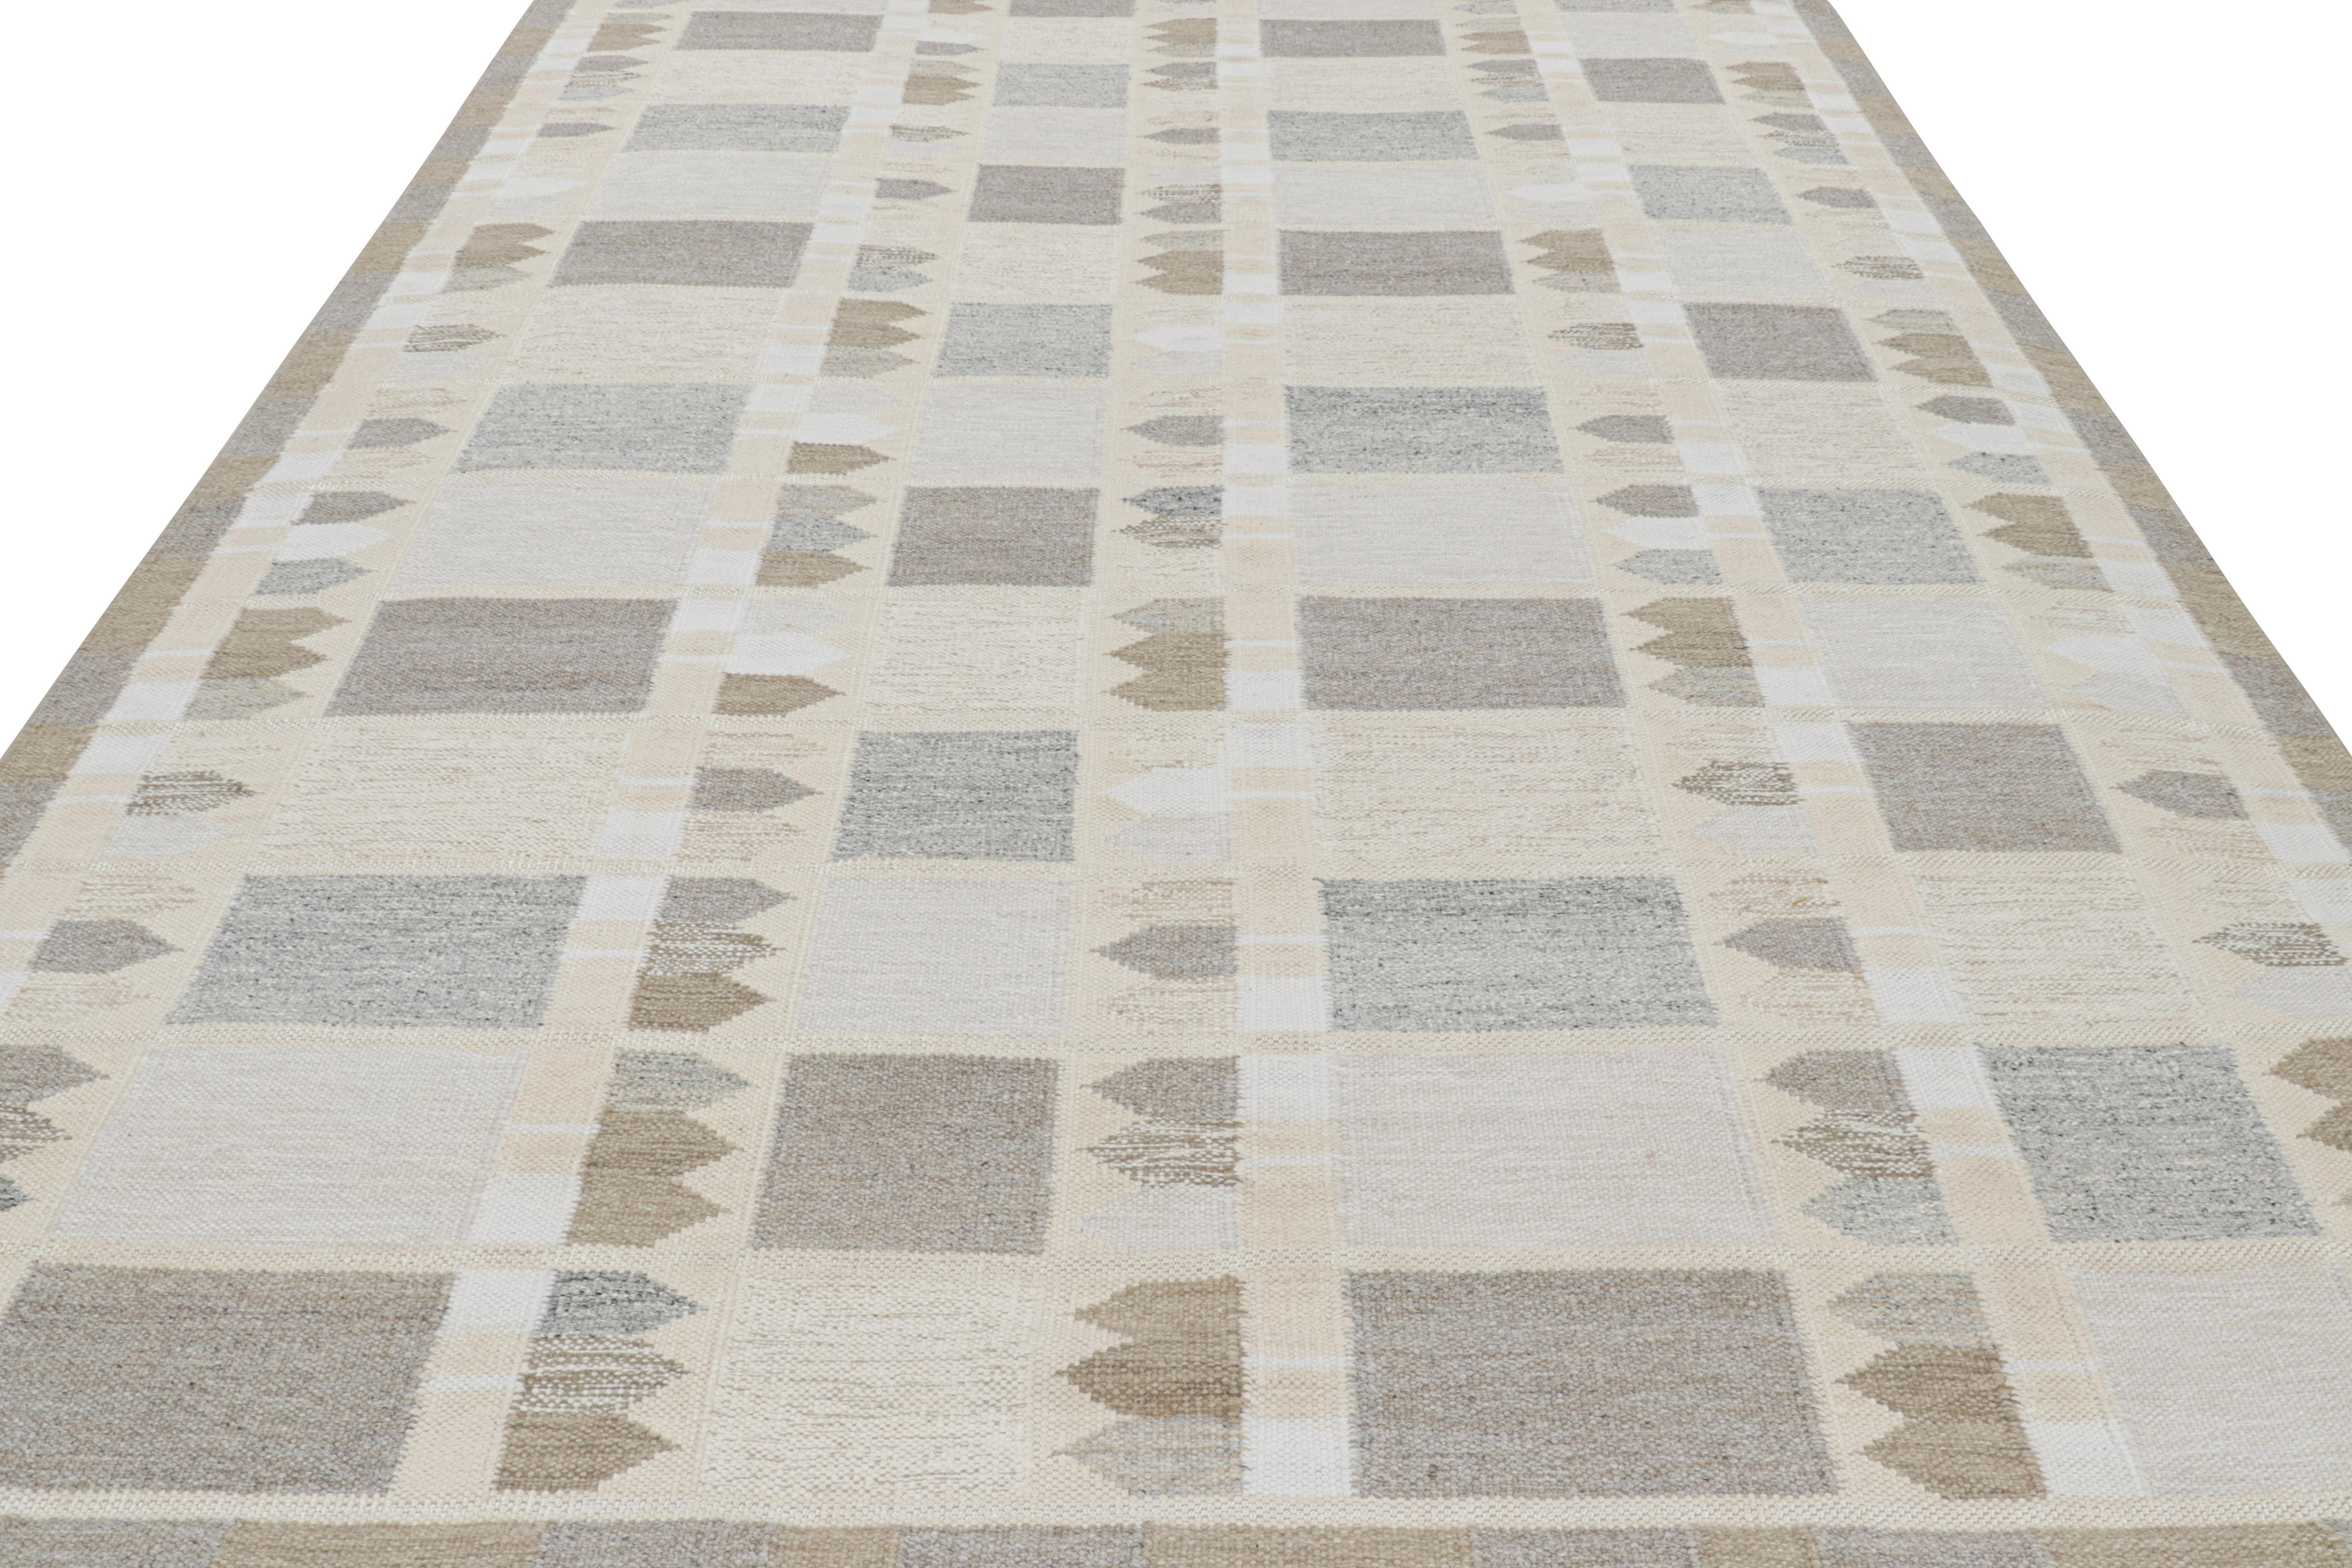 Hand-Woven Rug & Kilim’s Scandinavian Style Deco Rug in Beige-Brown with Geometric Patterns For Sale